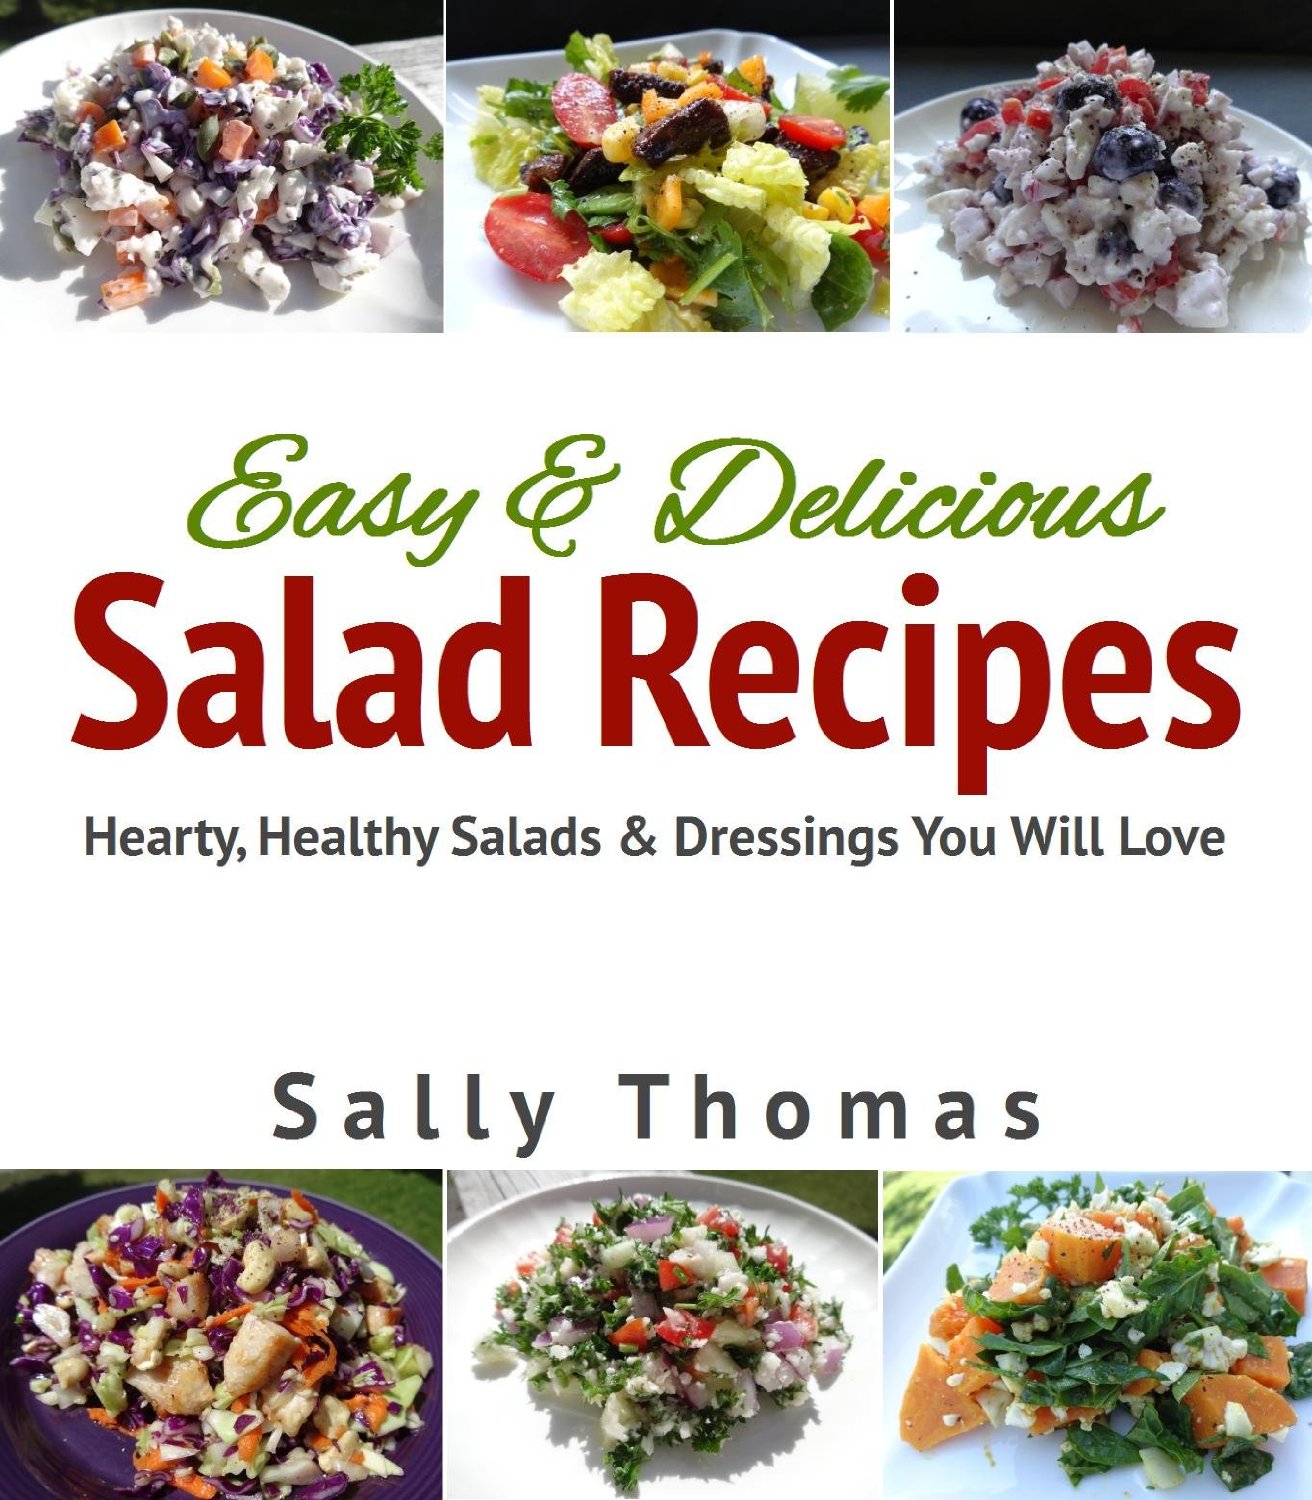 Easy & Delicious Salad Recipes: Hearty, Healthy Salads & Dressings You Will Love